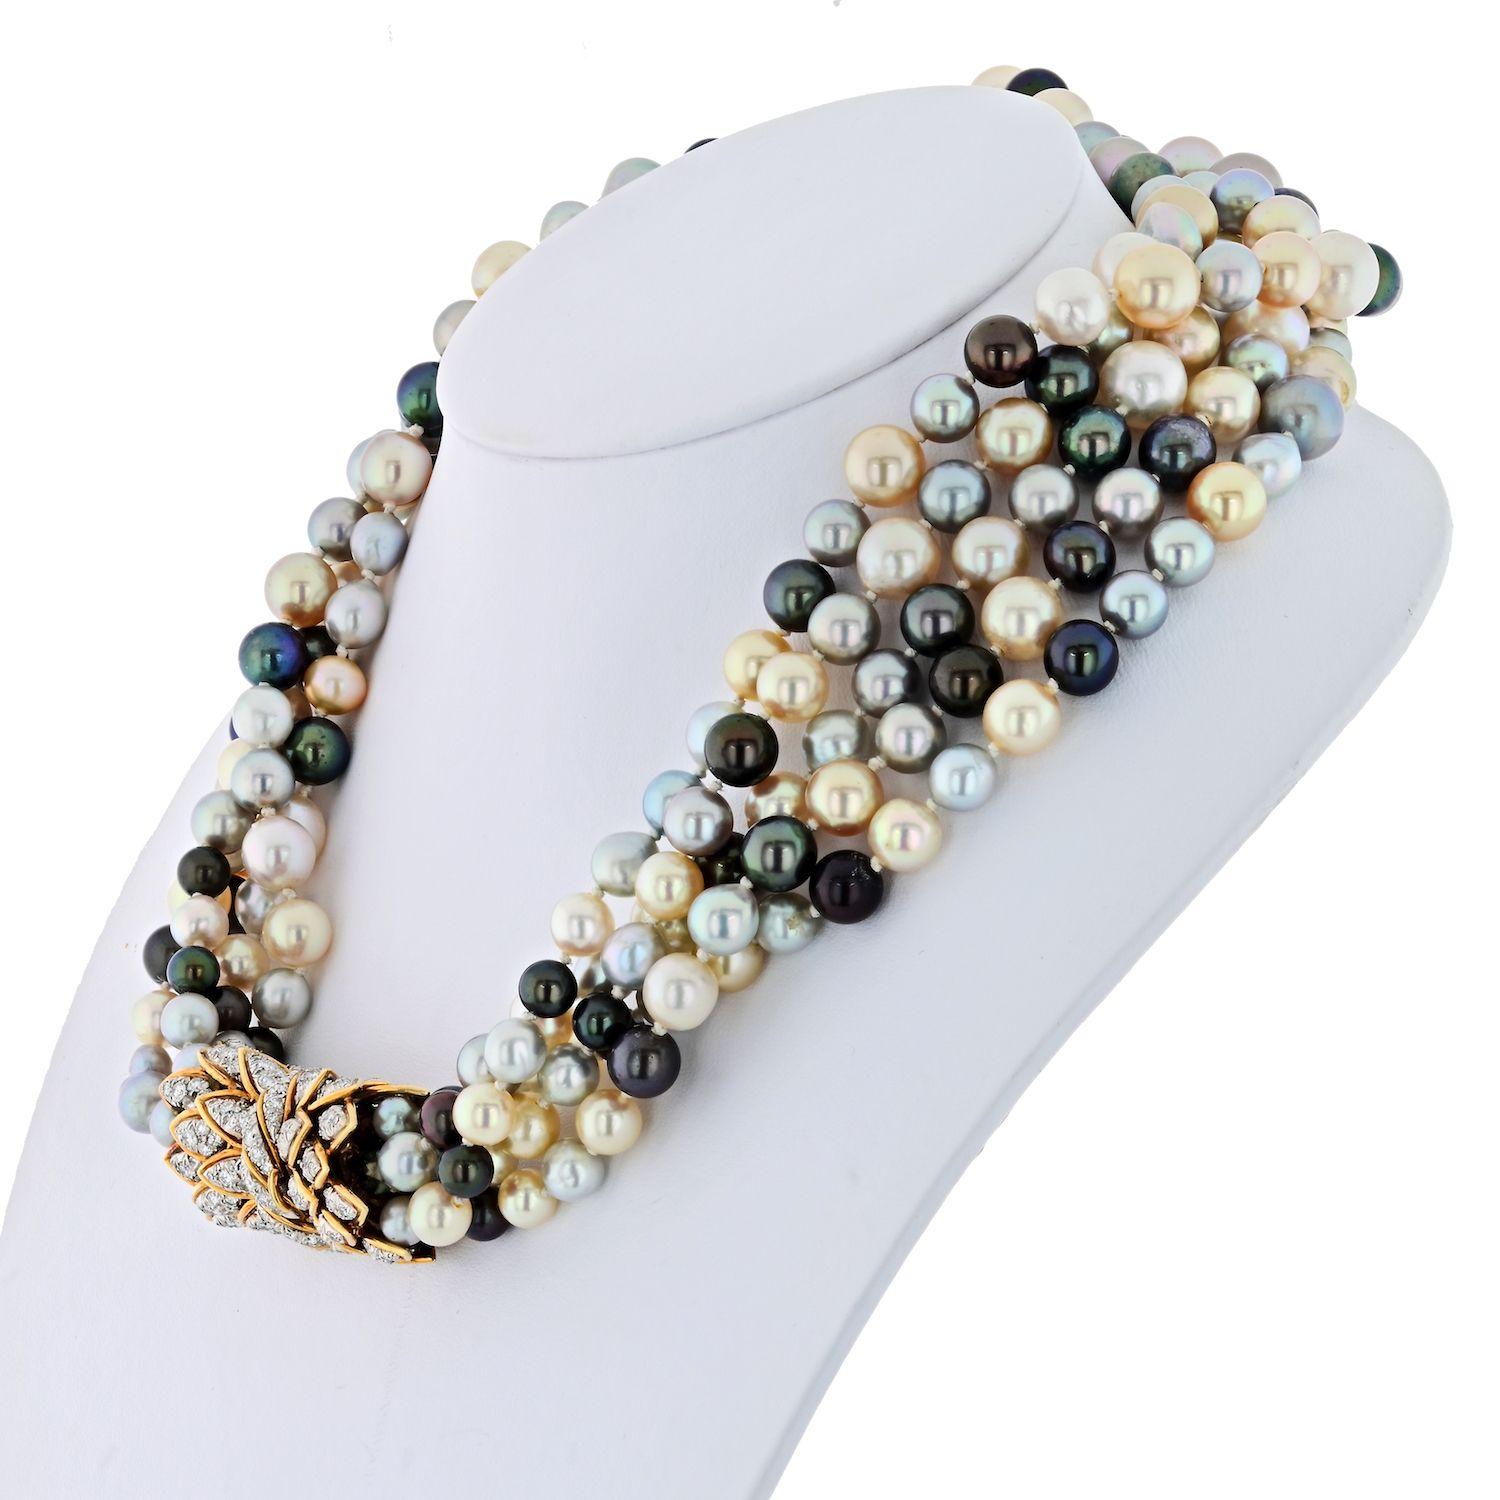 This stunning five-strand pearl necklace by David Webb is a true statement piece. Measuring 17 inches in length, the strands are adorned with pearls ranging from 8mm to 10mm in size. 

The necklace is completed with a Yellow Gold and Platinum clasp,